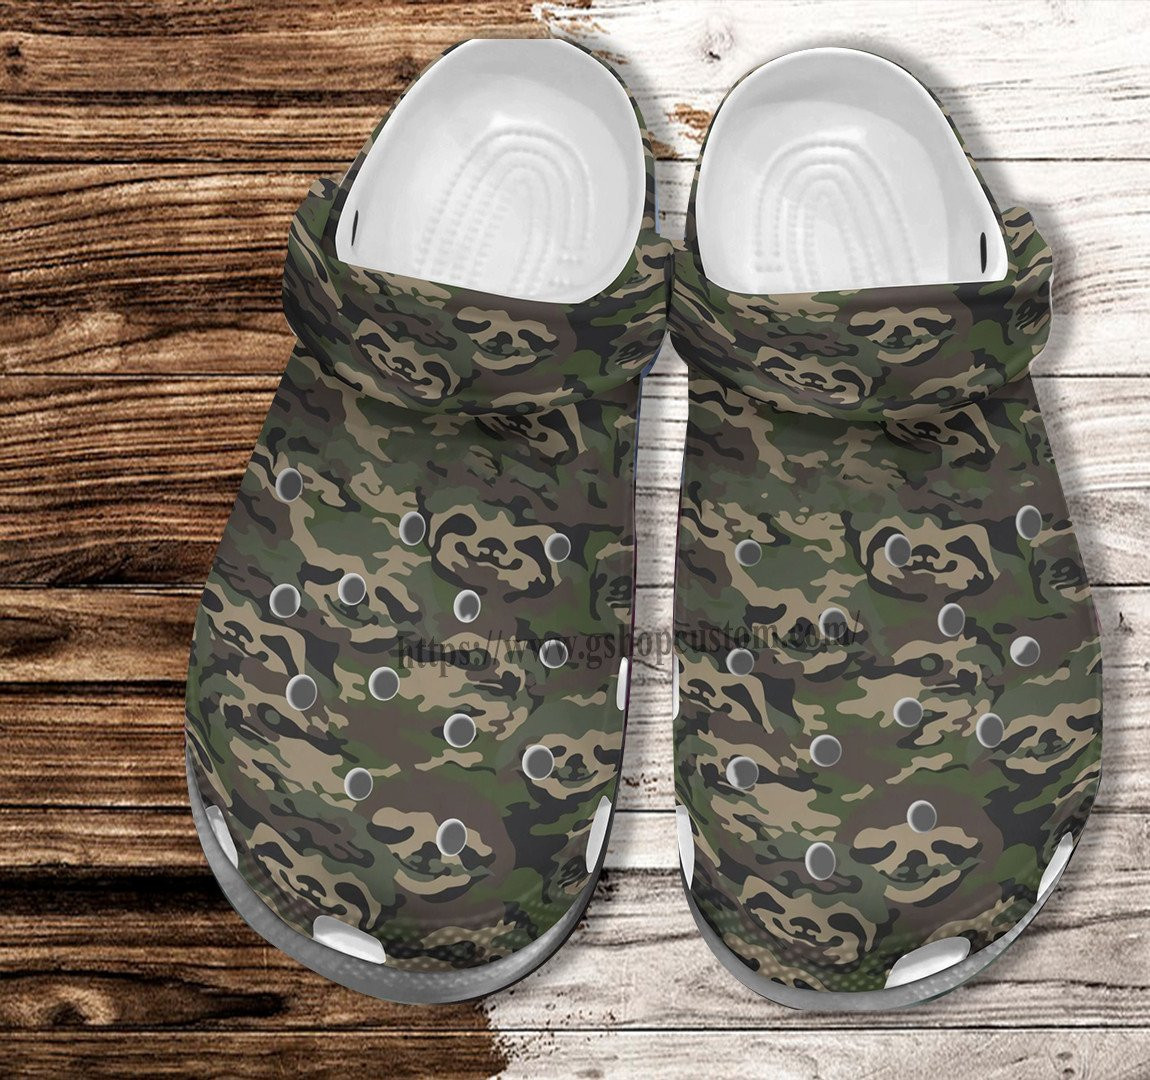 Camo Sloth Funny Crocs Shoes Gift Men Women- Lazy Sloth Camouflage Army Shoes Croc Clogs